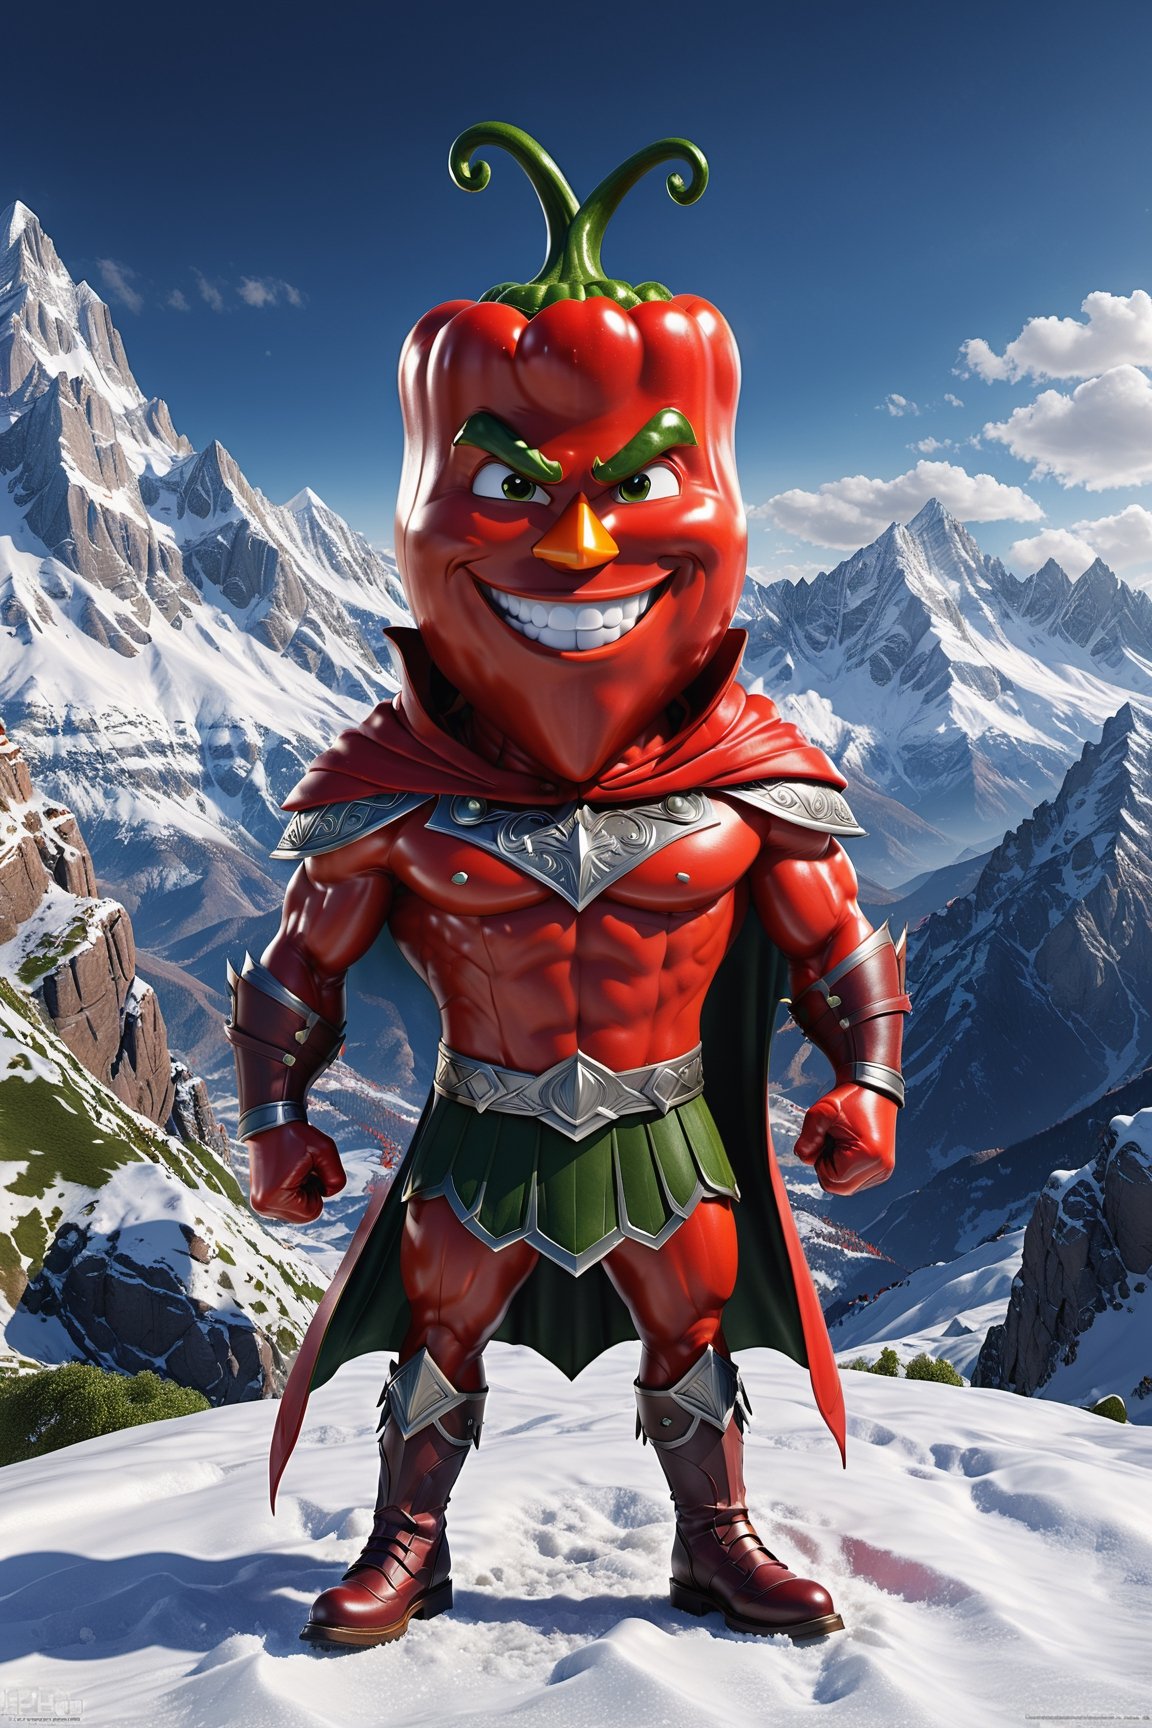 High definition photorealistic render of an incredible and mysterious character of a head mr red pepper vegetable warrior, with muscles and a big smile, with boots and capes, in a mountains snow, with luxurious details in marble and metal and details in parametric architecture and art deco, the vegetable It must be the head of the character full body pose themed red pepper themed costumes, magical phantasy